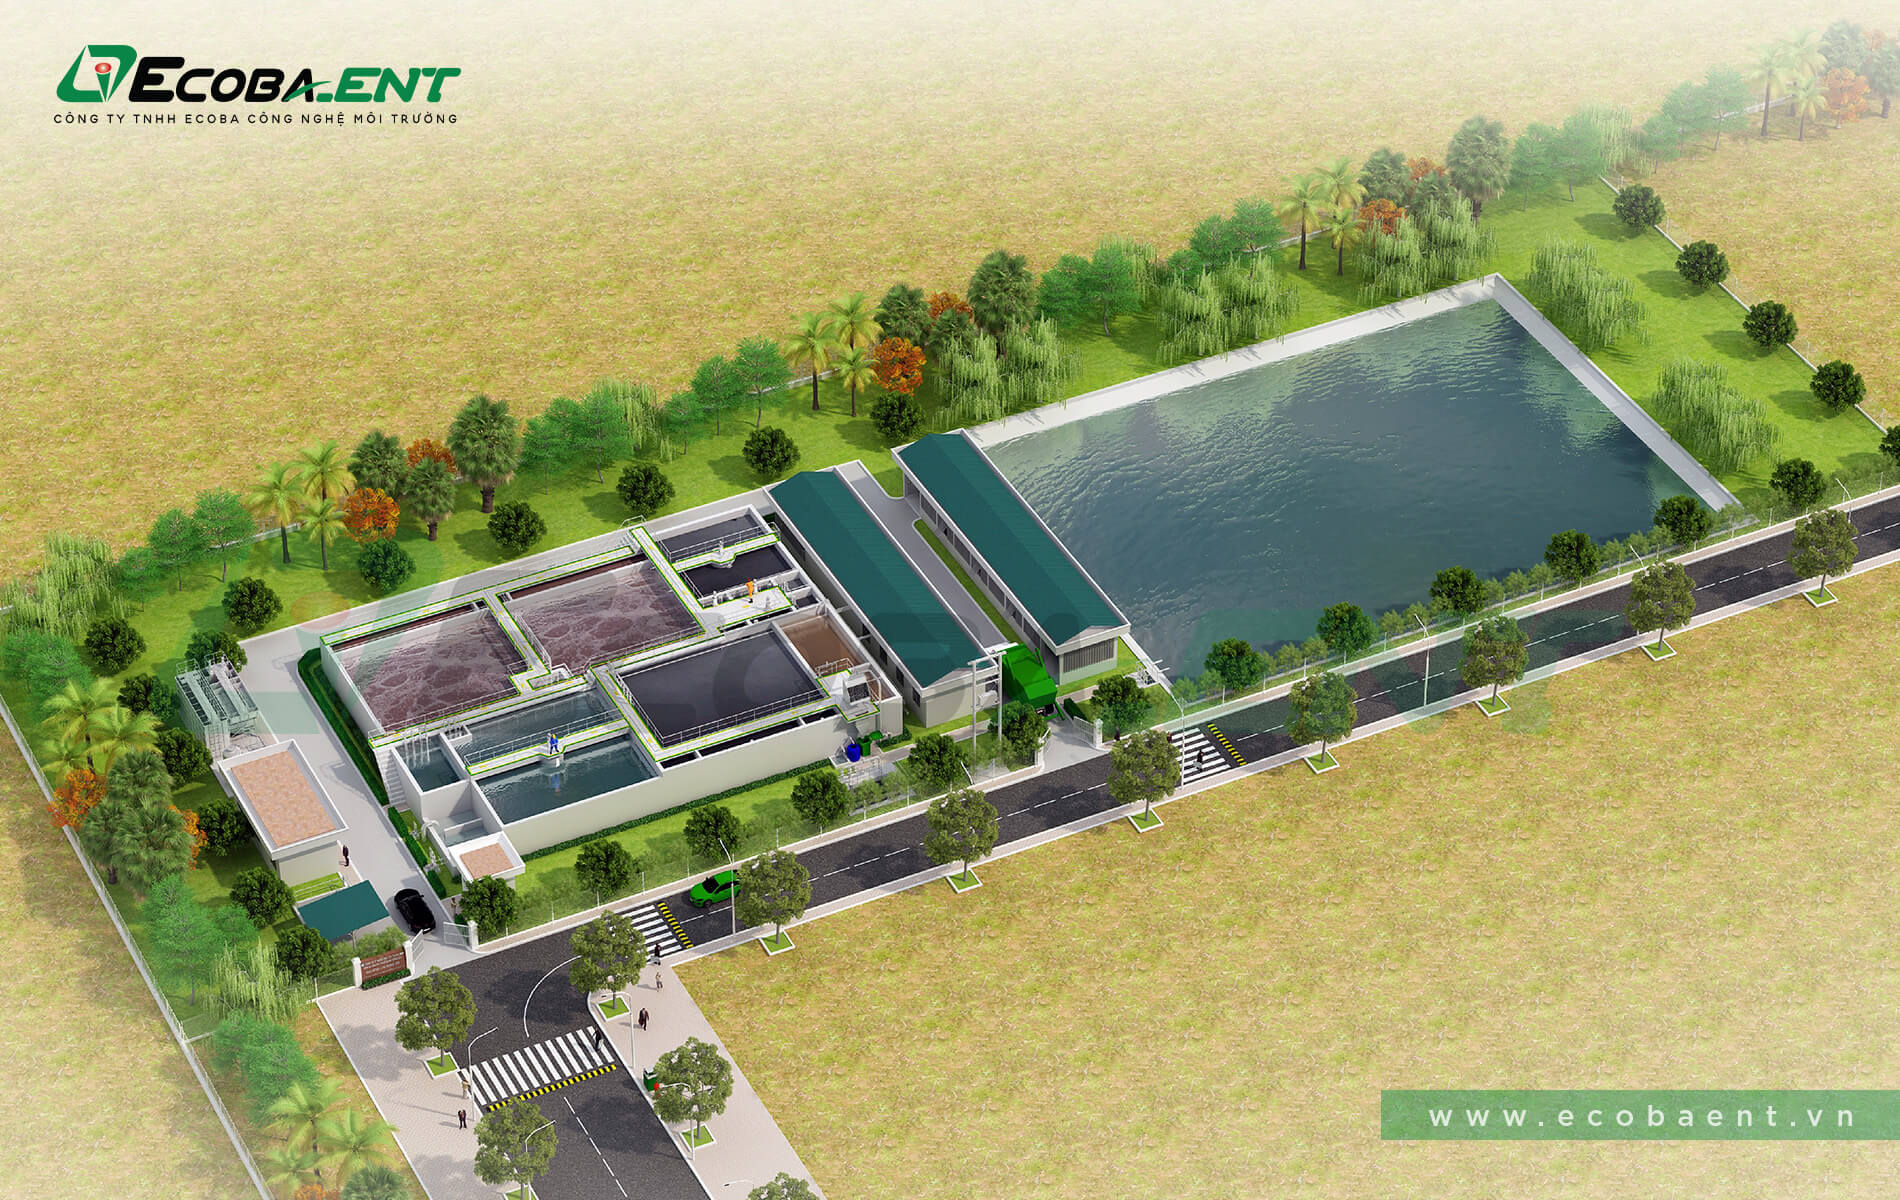 The centralized wastewater treatment plant for Xuan Cau Industrial Park and Non Tariff Zone